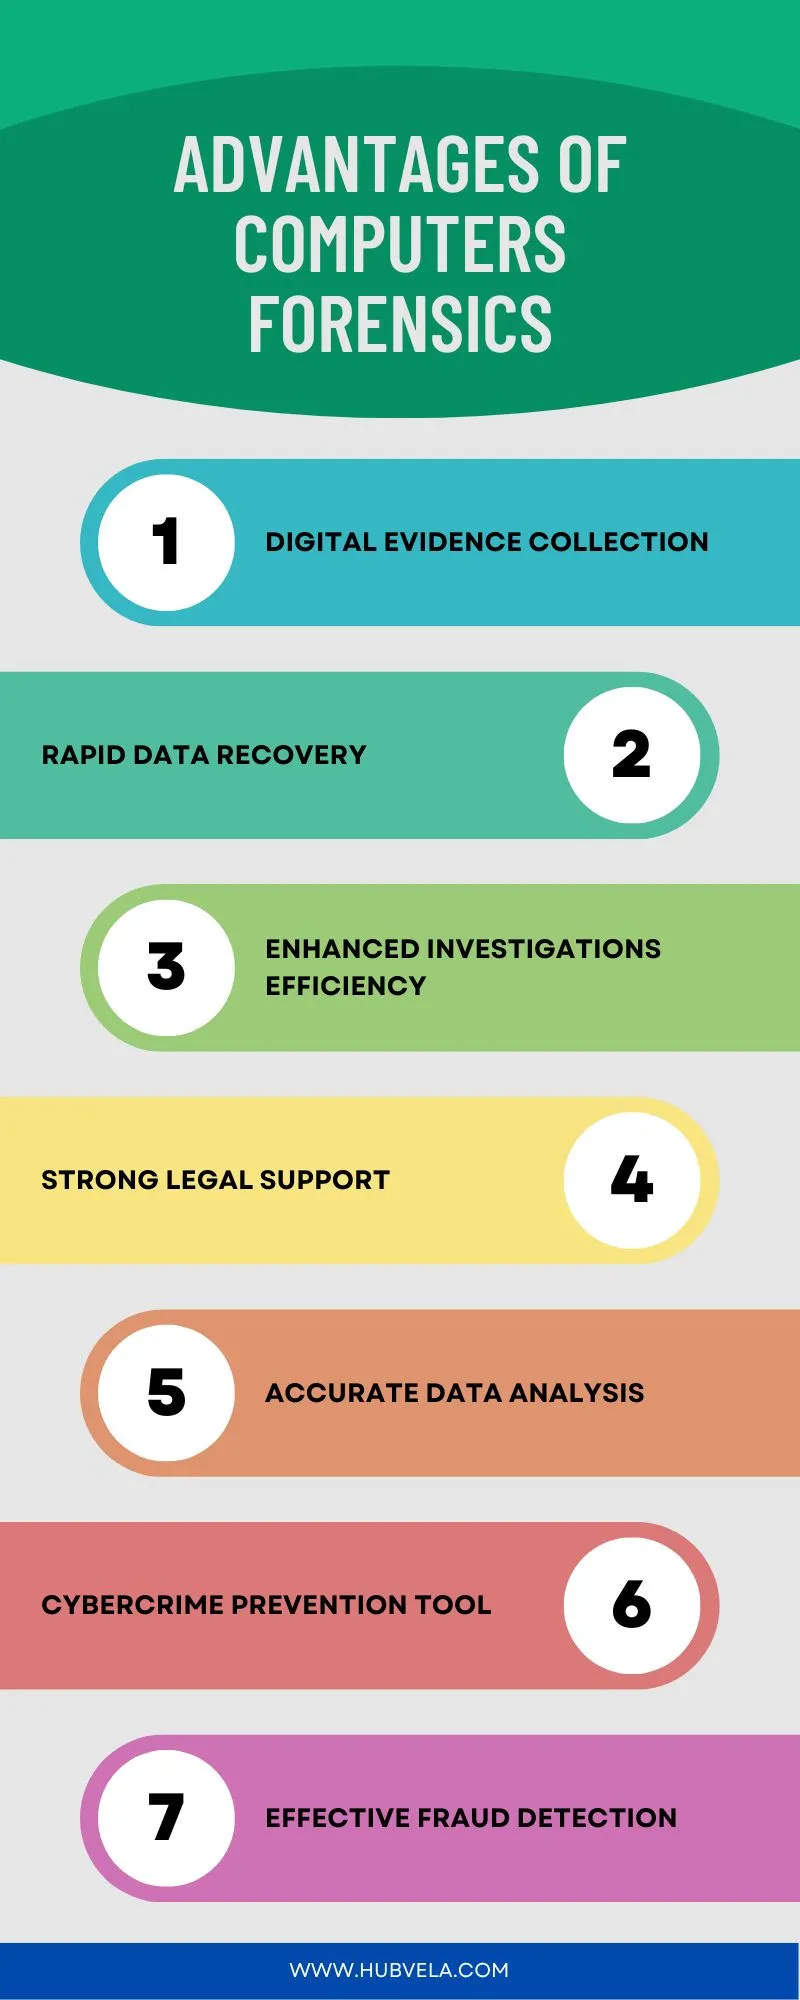 Advantages of Computers Forensics Infographic